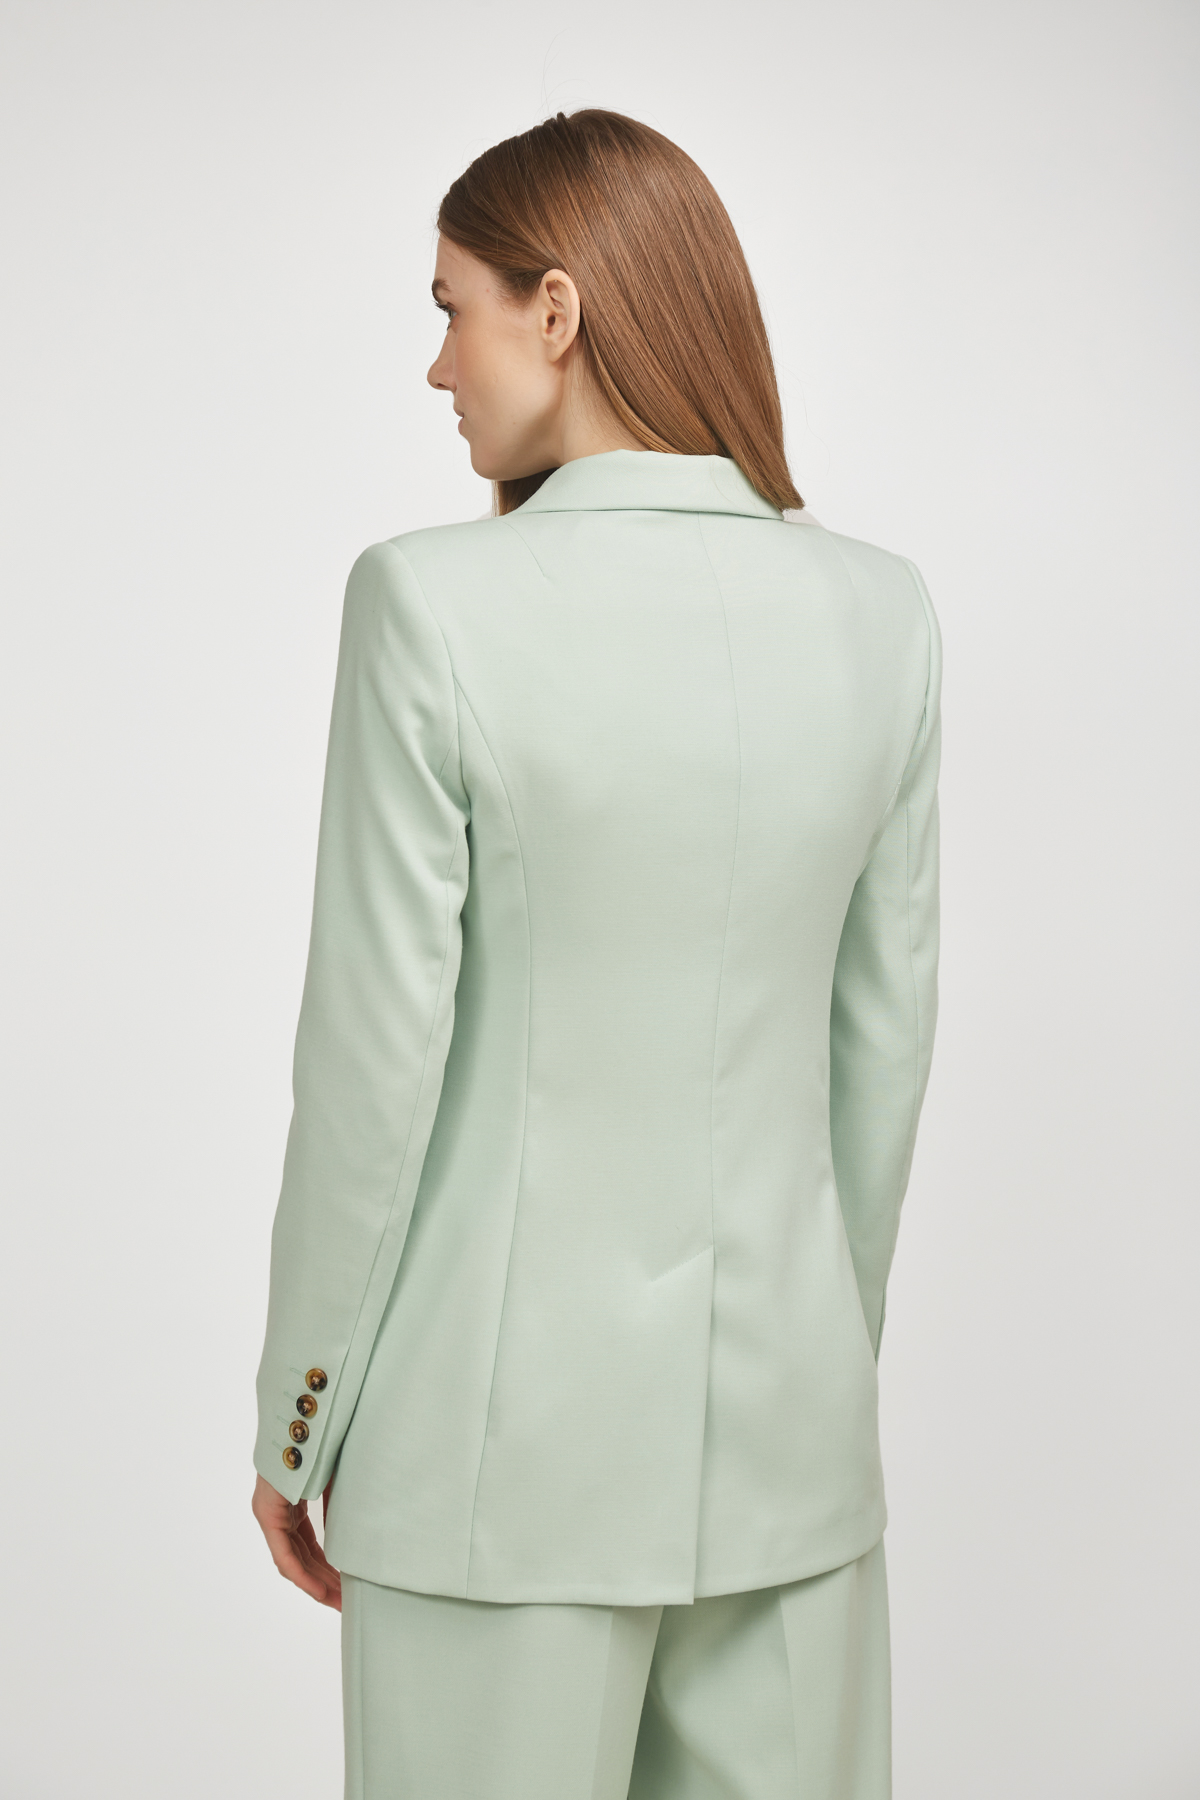 Mint double-breasted jacket with horn buttons, photo 3